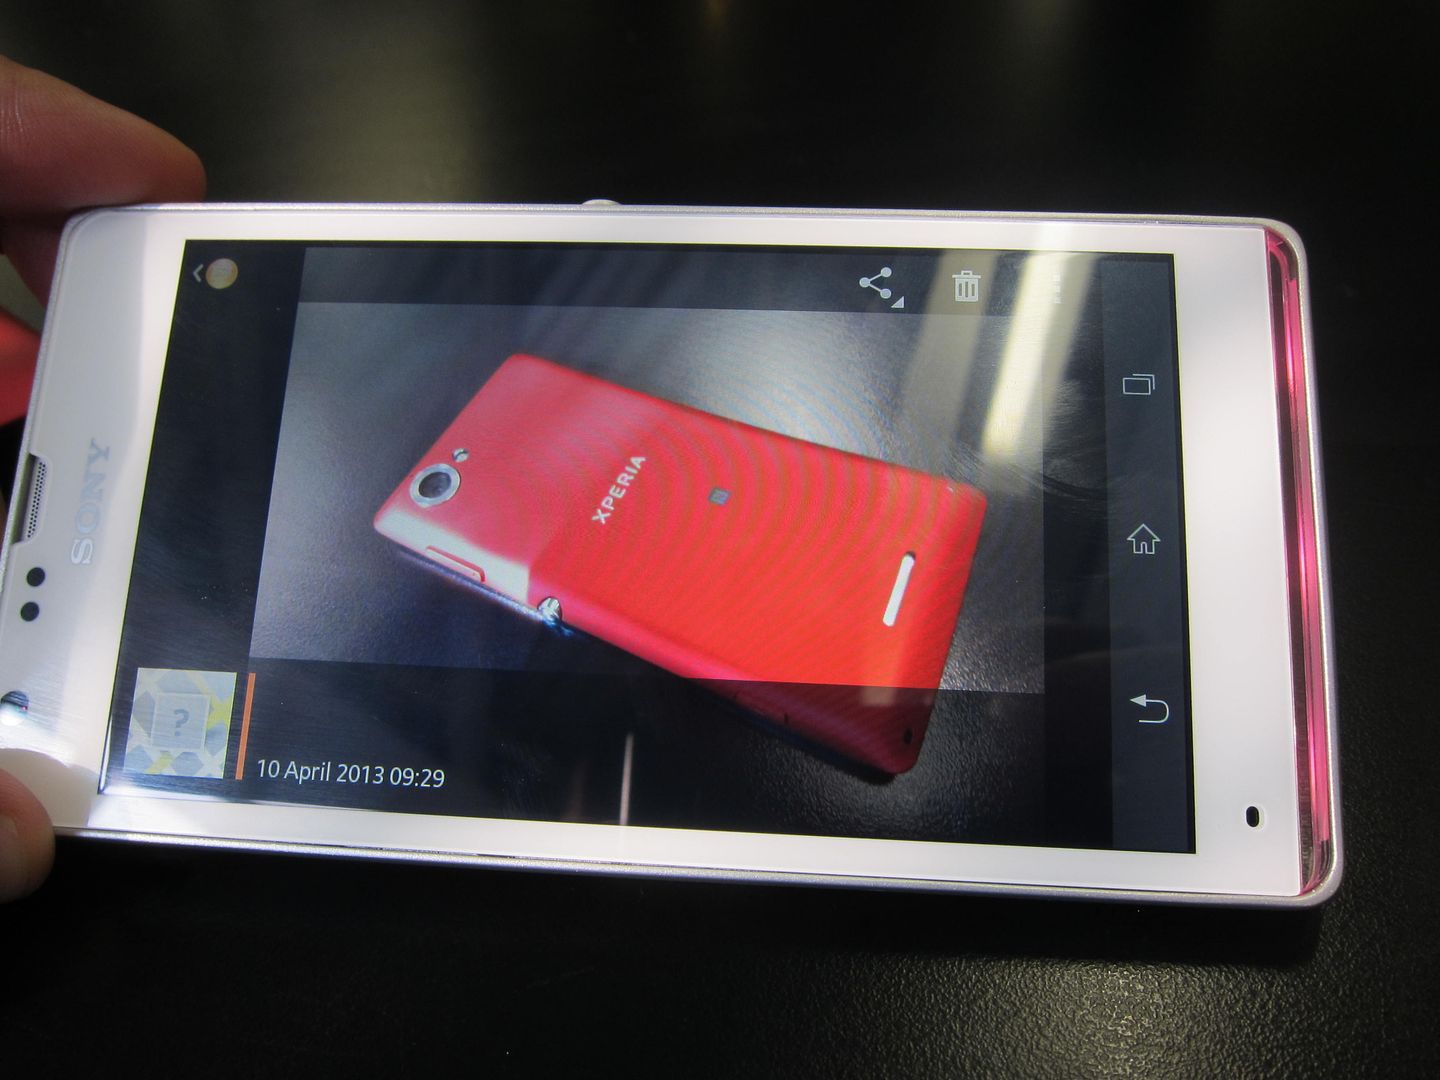 Xperia SP hands-on impressions